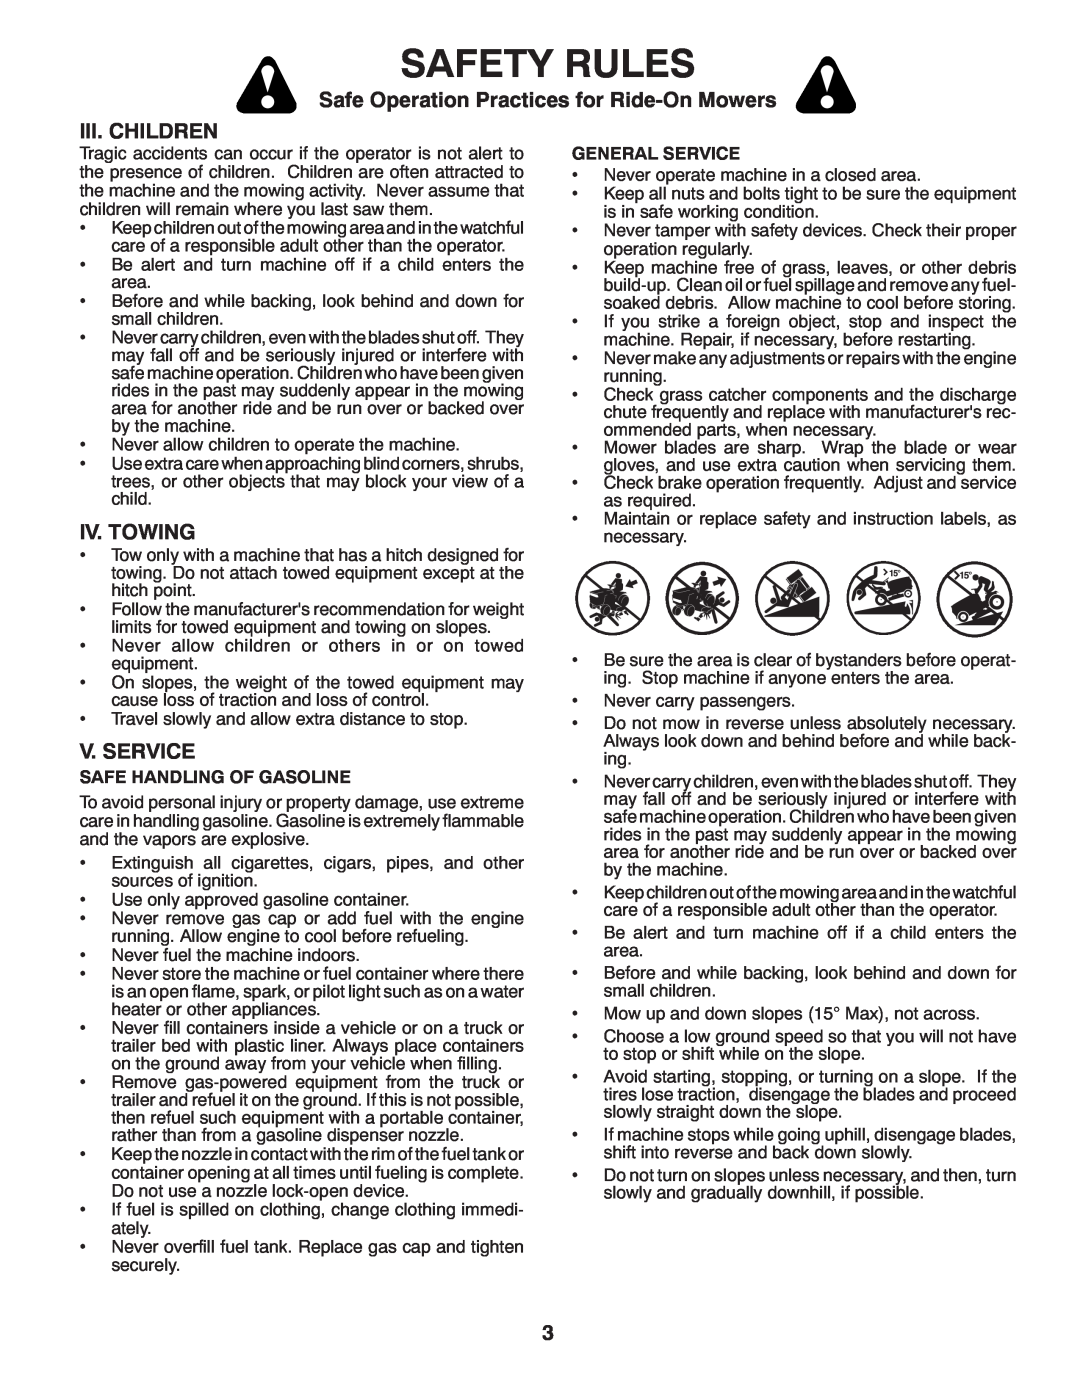 McCulloch MC2042YT (96042011500) manual Safe Operation Practices for Ride-On Mowers III. CHILDREN, Iv. Towing, V. Service 